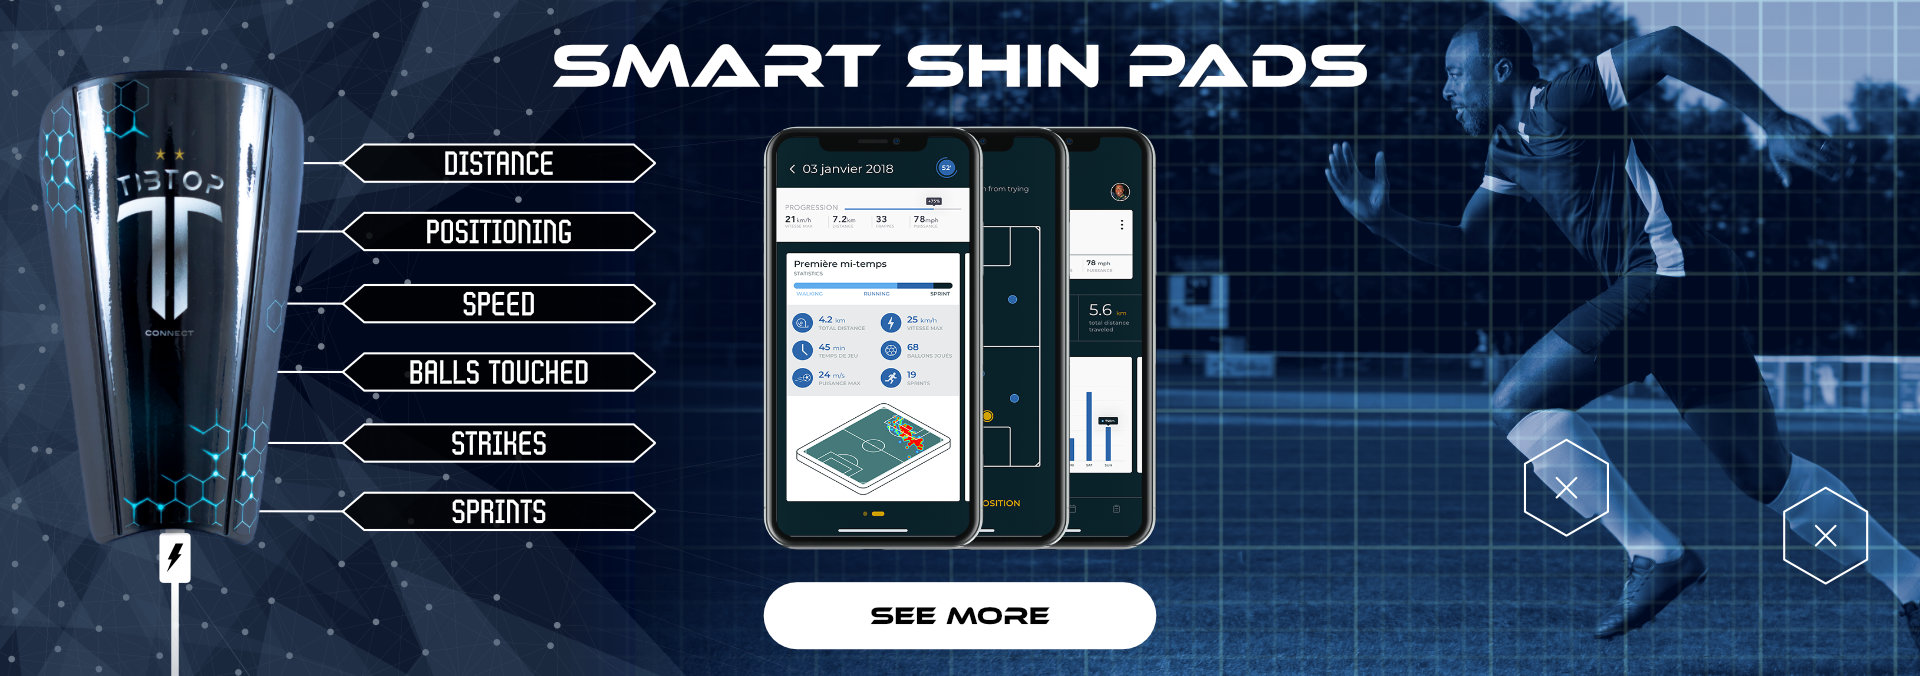 Switch to SMART SHIN PADS to measure your performance